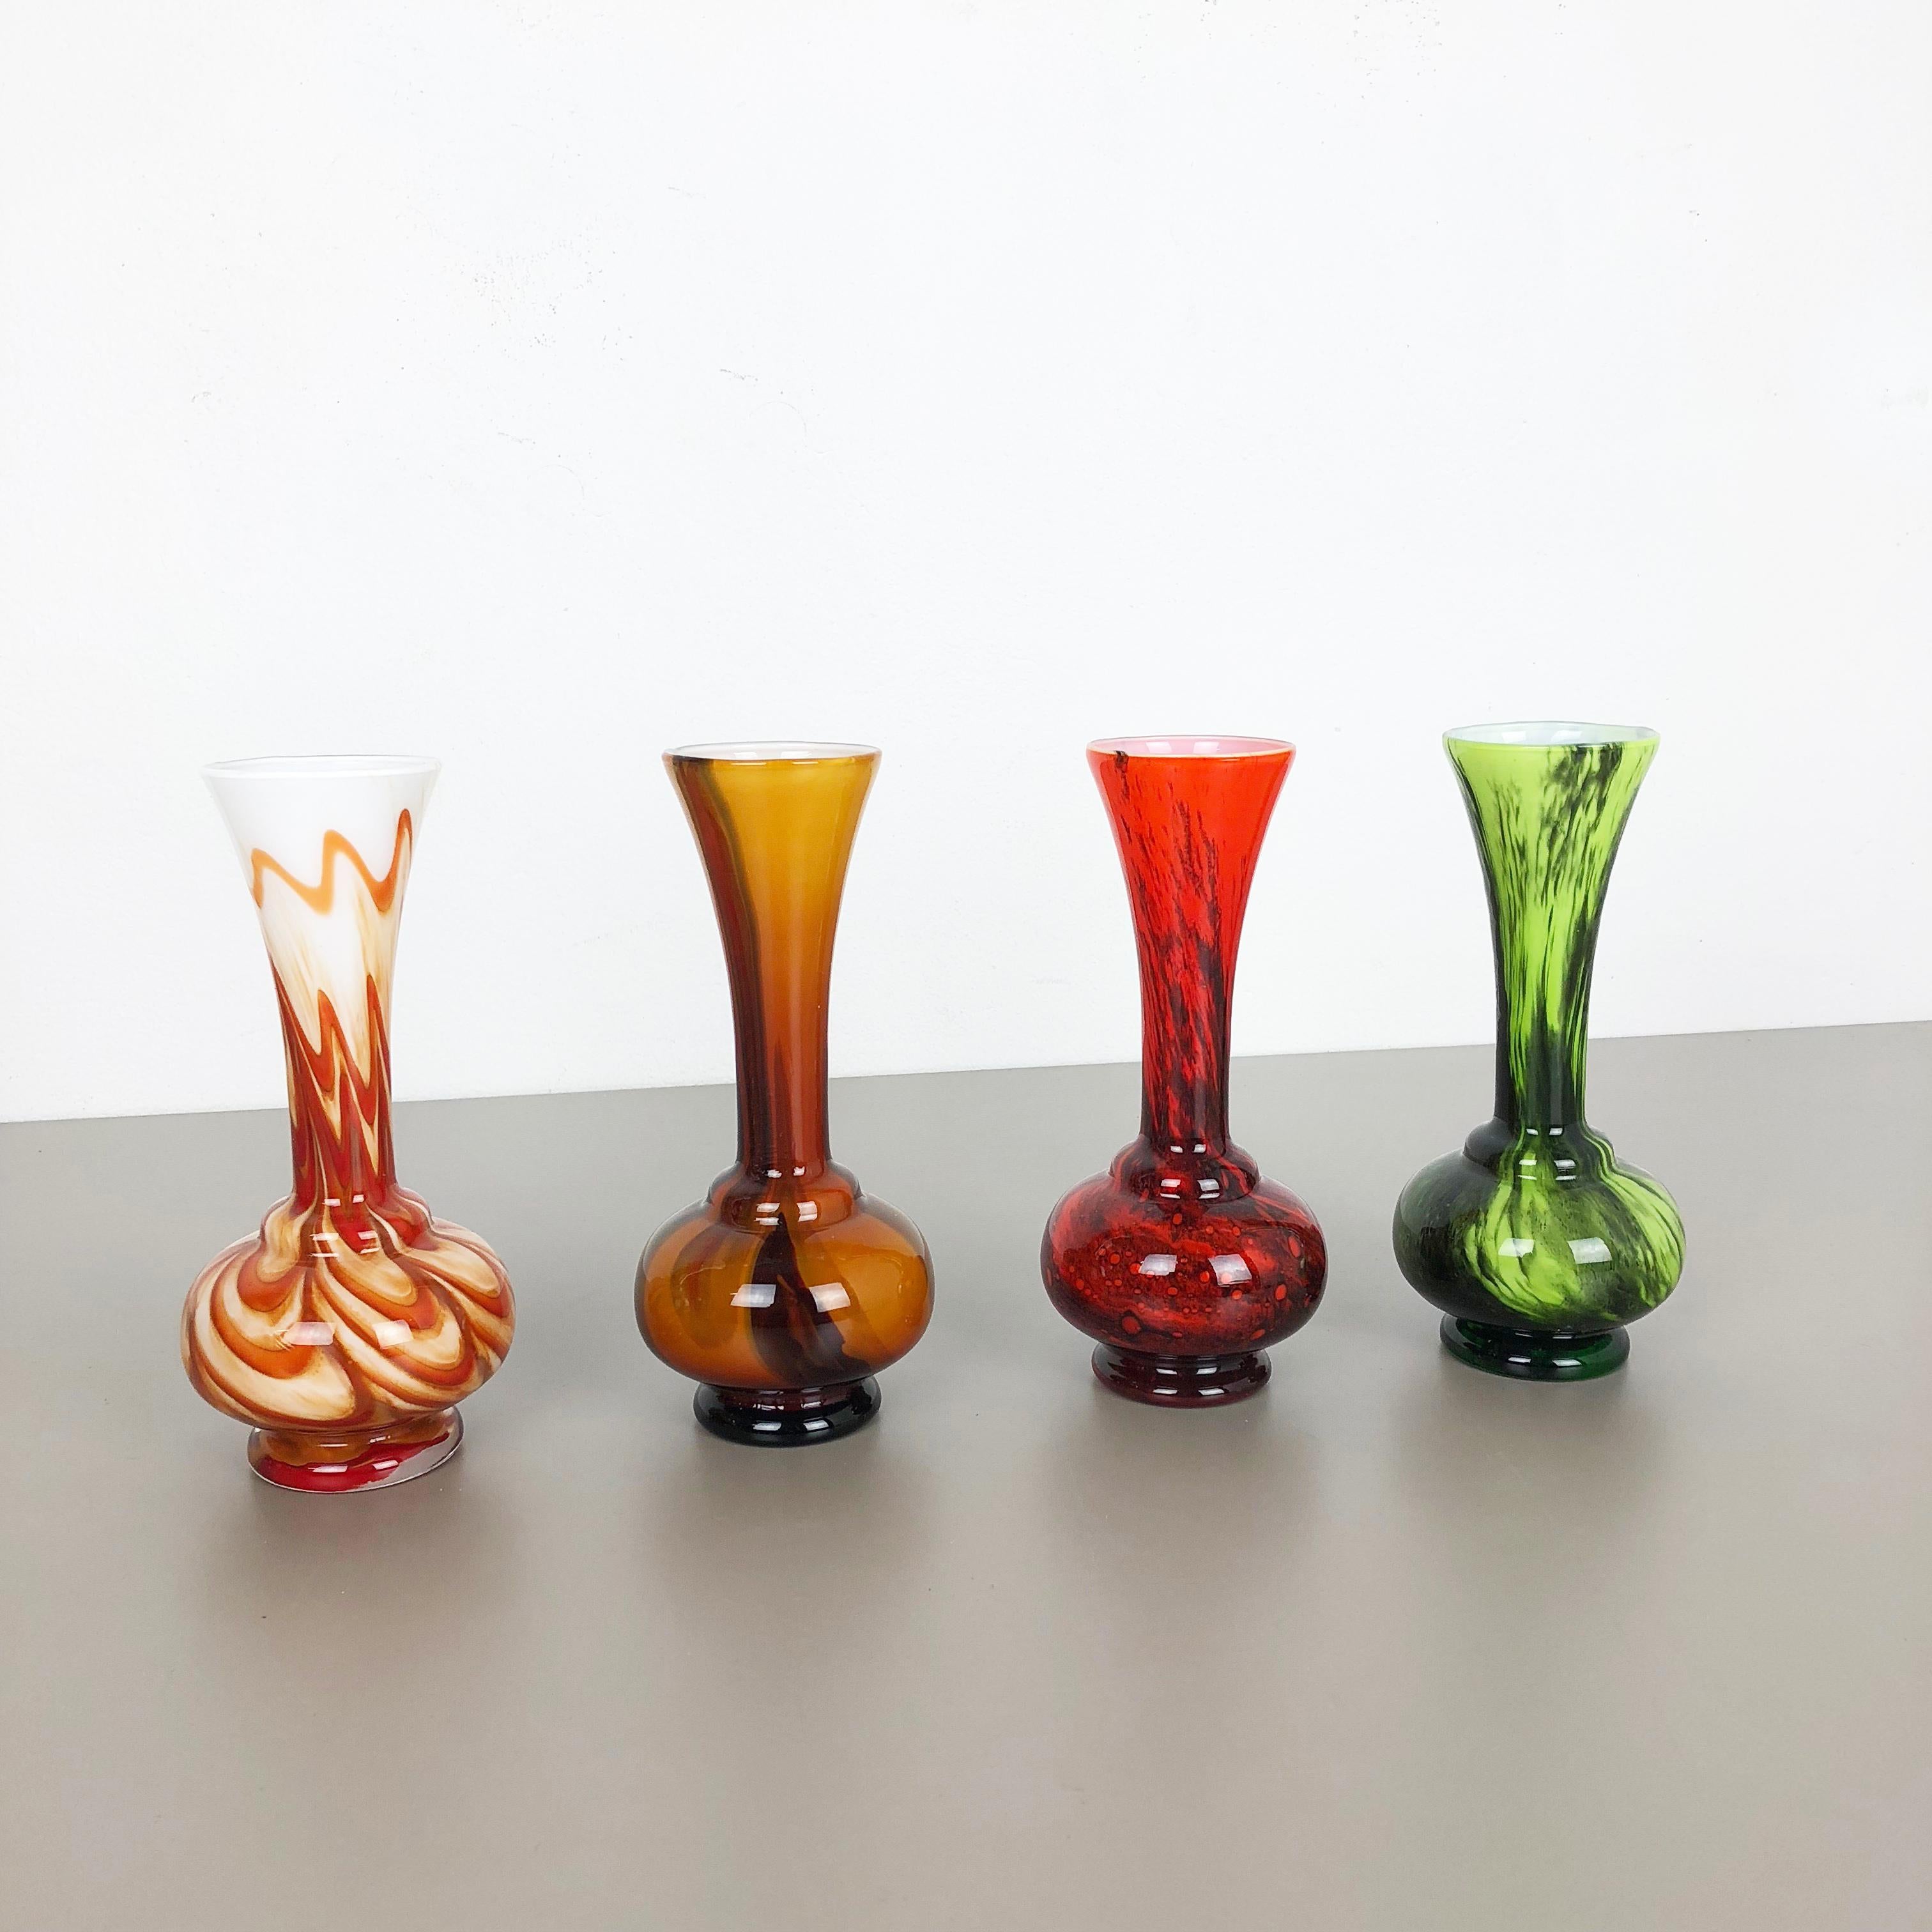 Article: Pop Art vase set of 2

Producer: Opaline Florence

Design: Carlo Moretti

Decade: 1970s.

Description: Original vintage 1970s Pop Art hand blown vase set made in Italy by Opaline Florence. Made of high quality Italian opal glass.